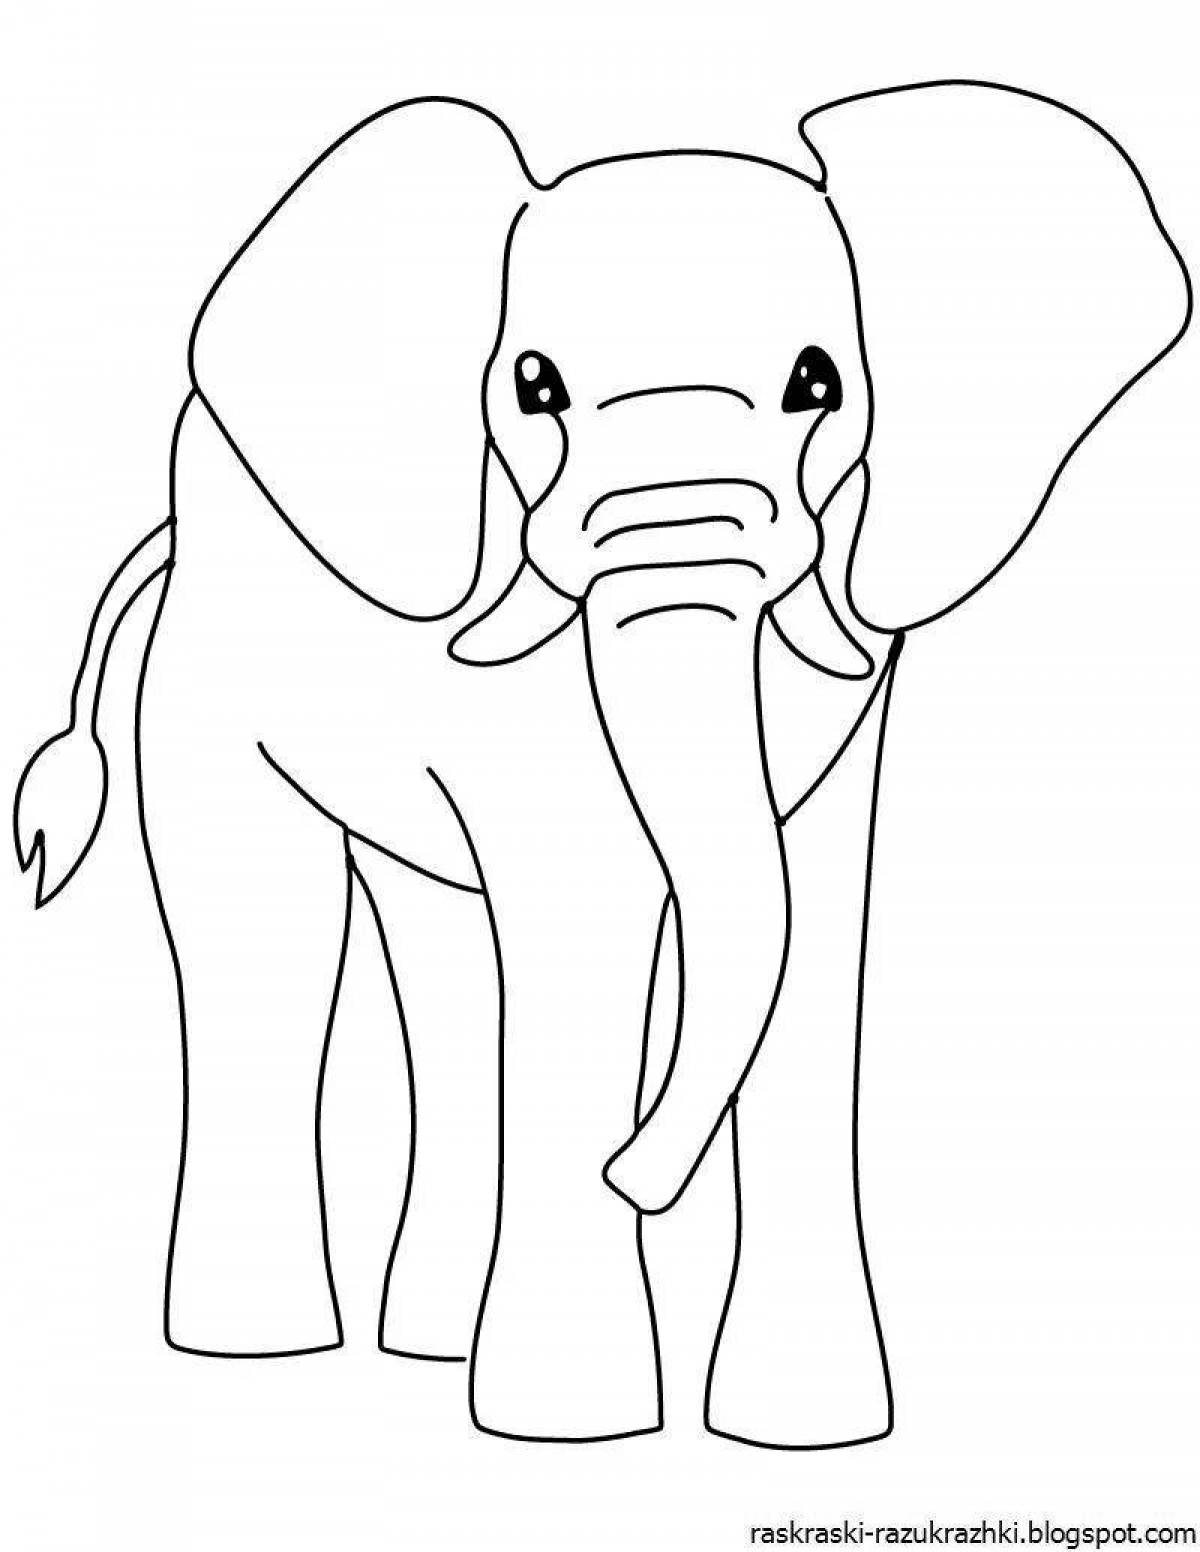 Elephant picture for kids #1